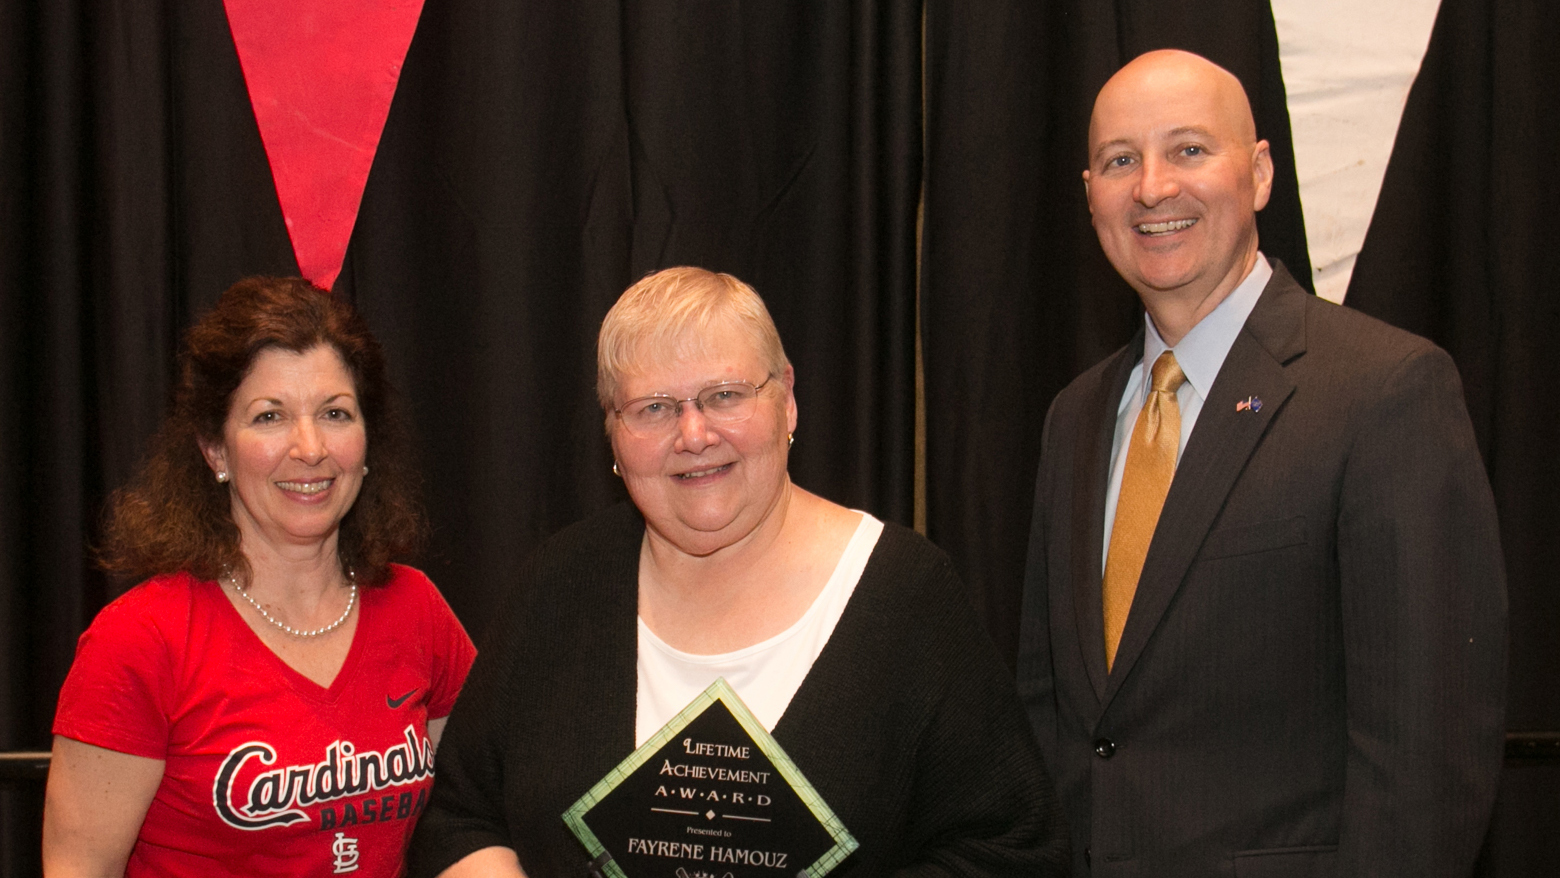 Fayrene Hamouz, associate professor in Nutrition and Health Sciences, received a lifetime achievement award from the Nebraska Restaurant Association April 18. She is pictured with association President Nicole Jesse and Gov. Pete Ricketts.